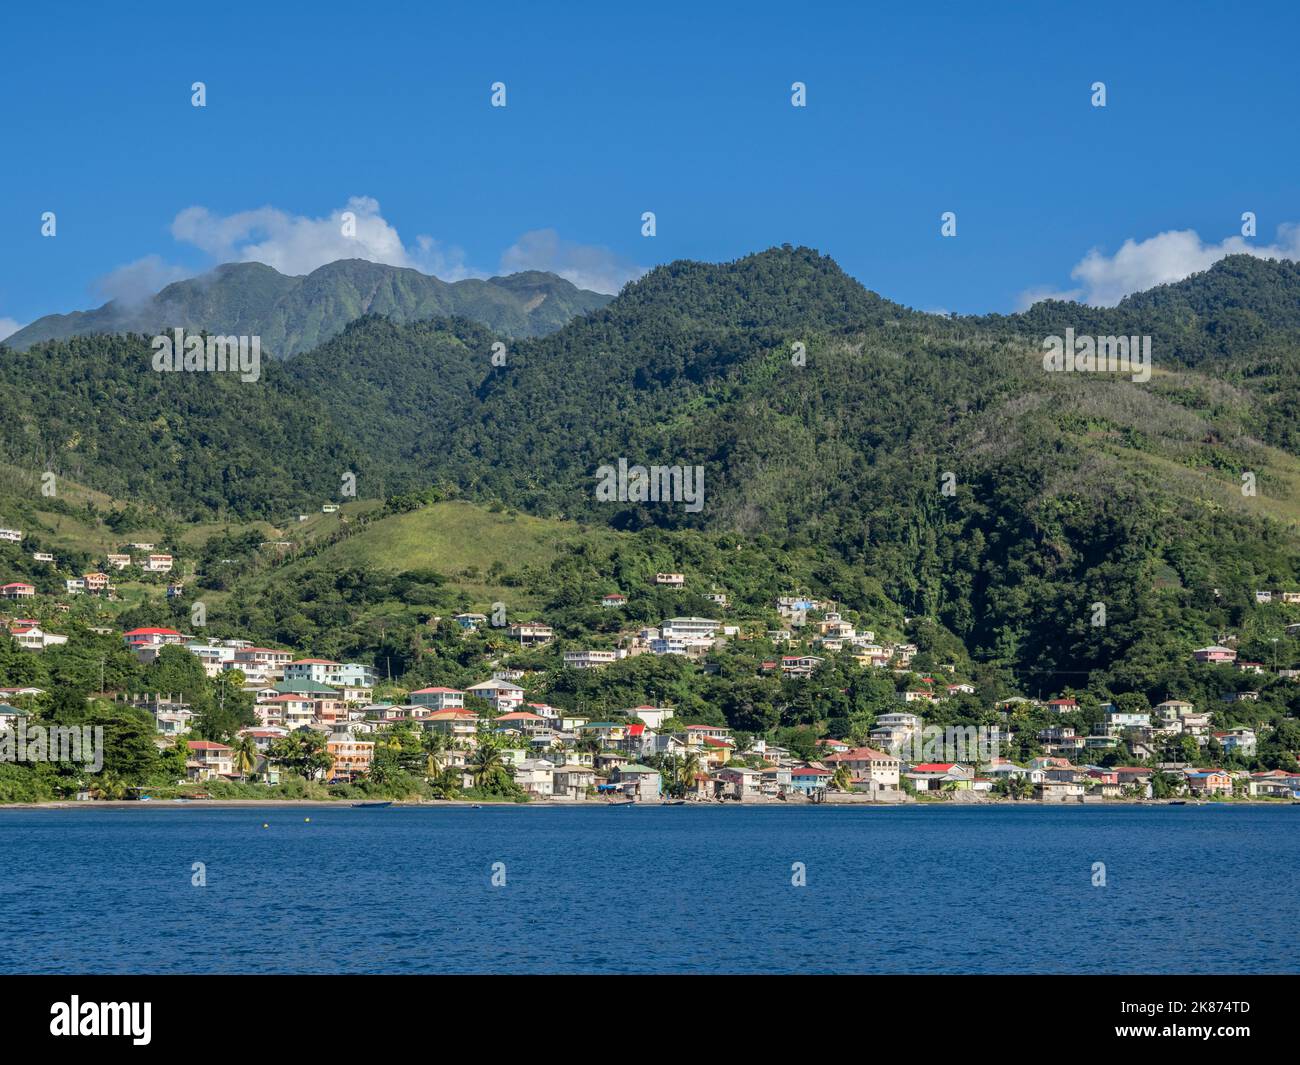 A view from the sea of the lush mountains surrounding the capital city of Roseau, on the west coast of Dominica Stock Photo